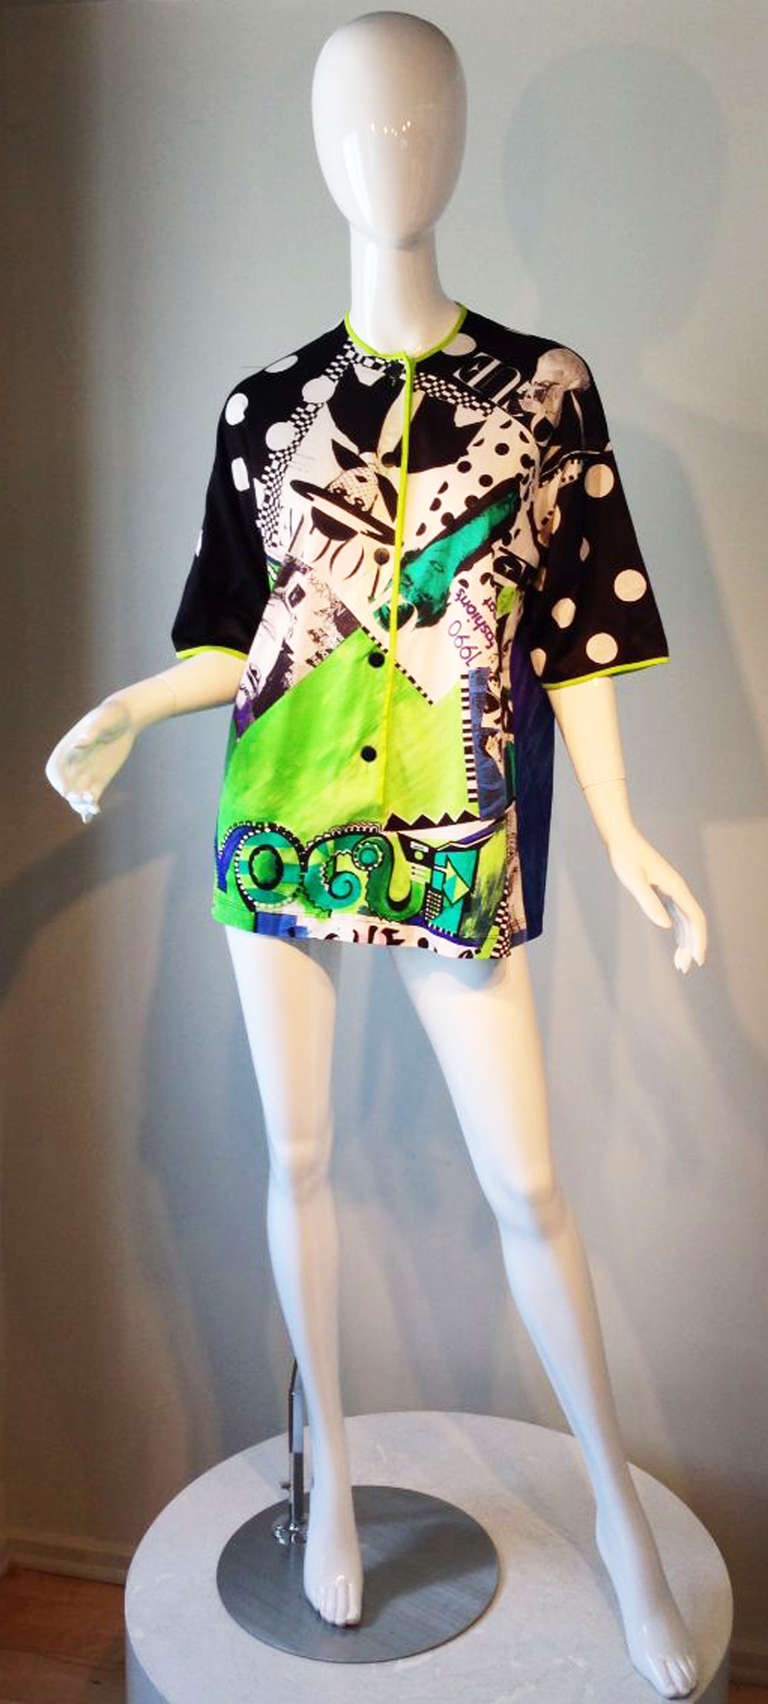 A fine vintage Gianni Versace 'Vogue' print top. Fine silk jersey dynamically printed with a button front. Appears unworn.